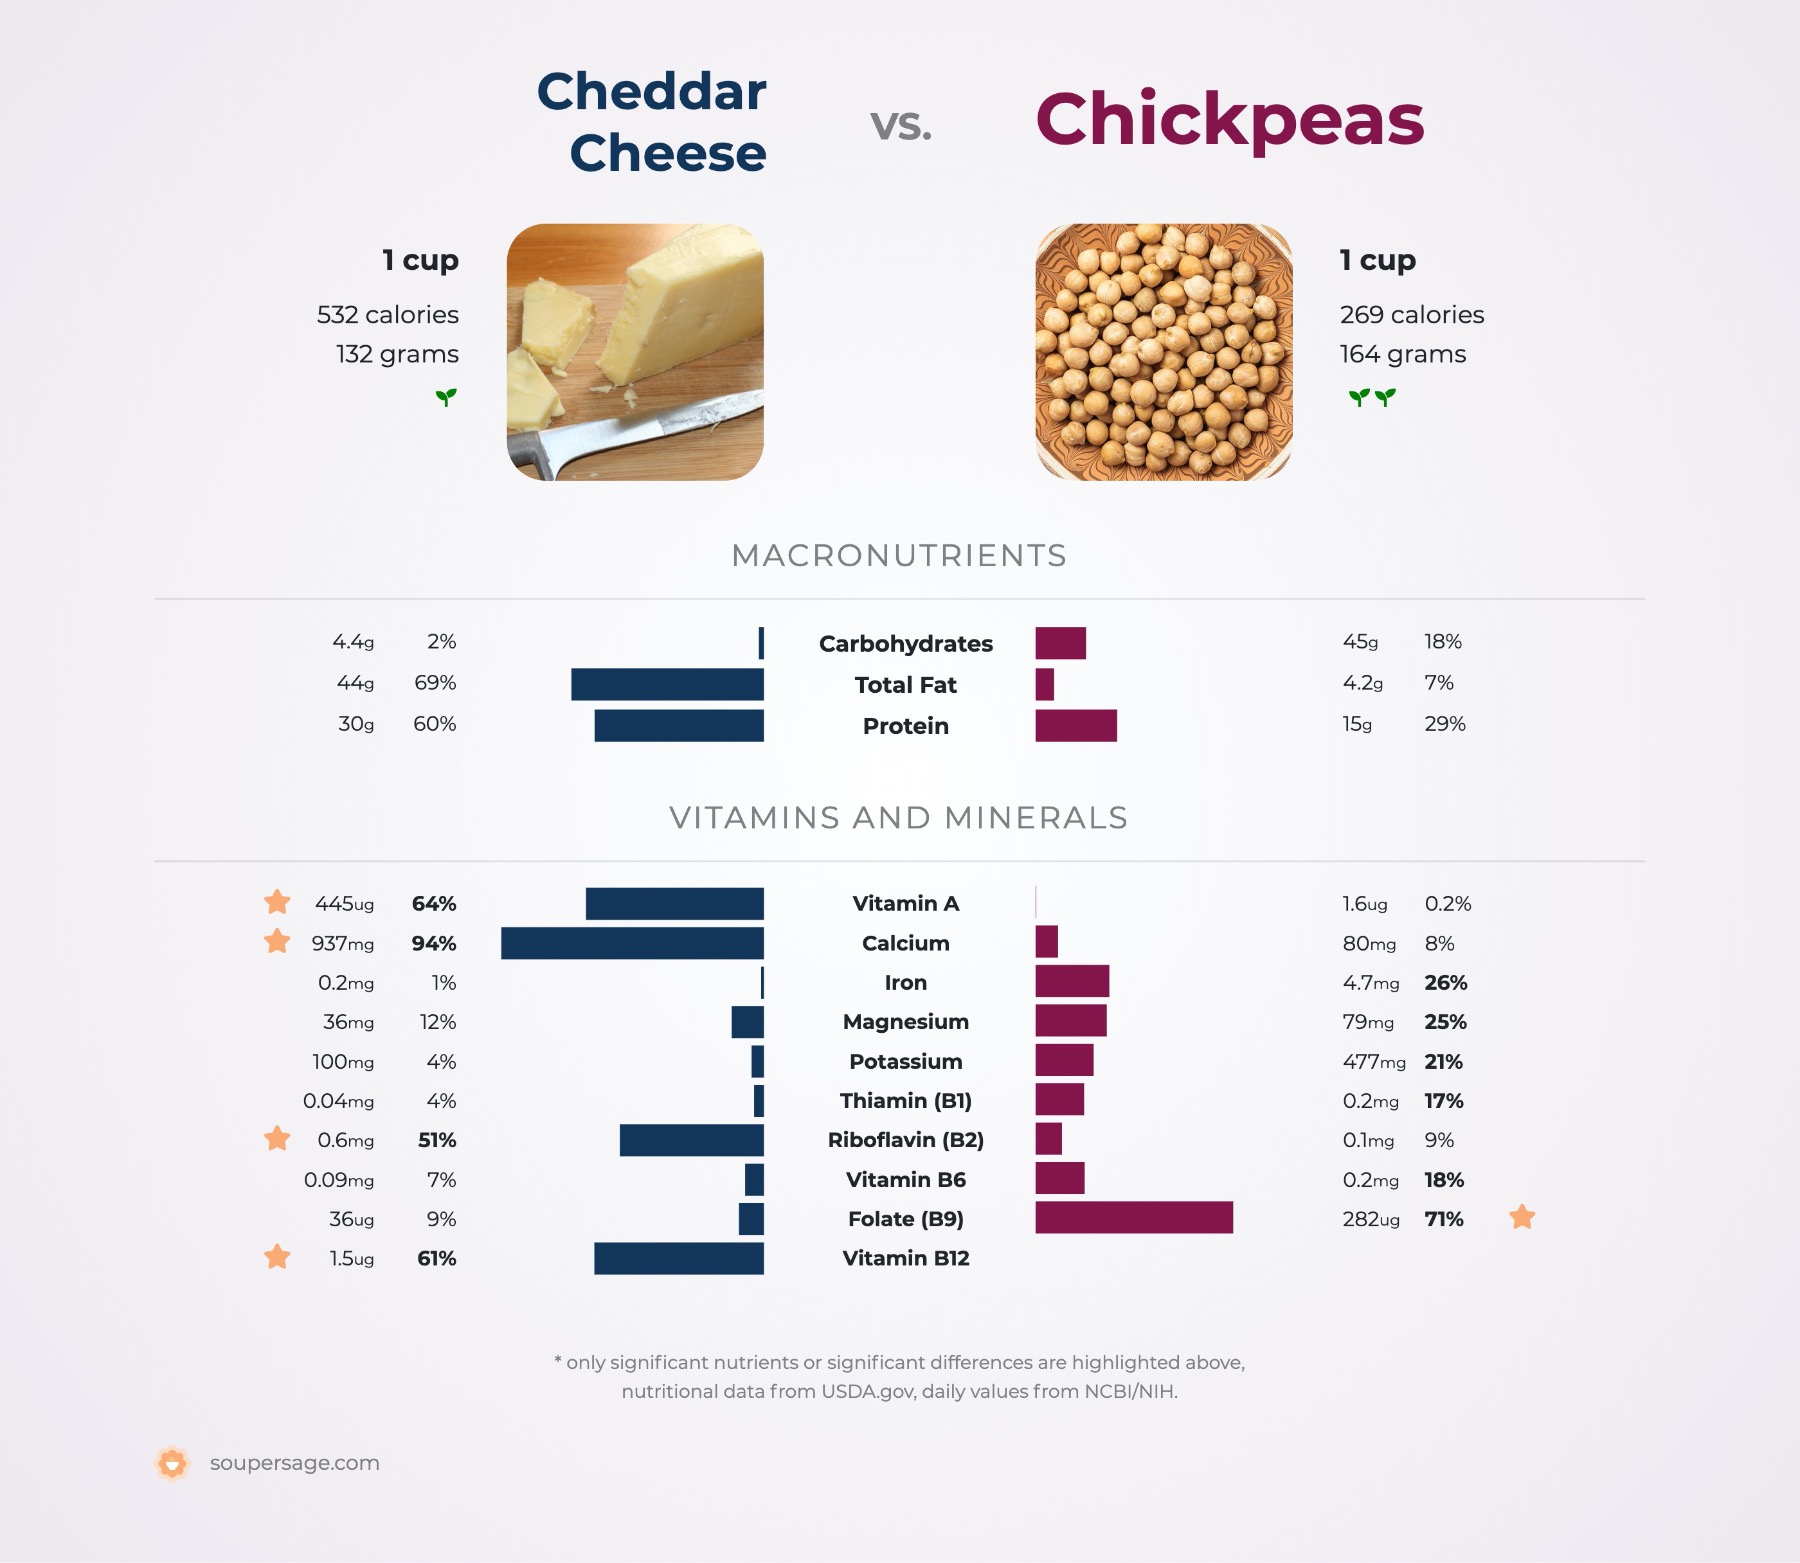 nutrition comparison of cheddar cheese vs. chickpeas